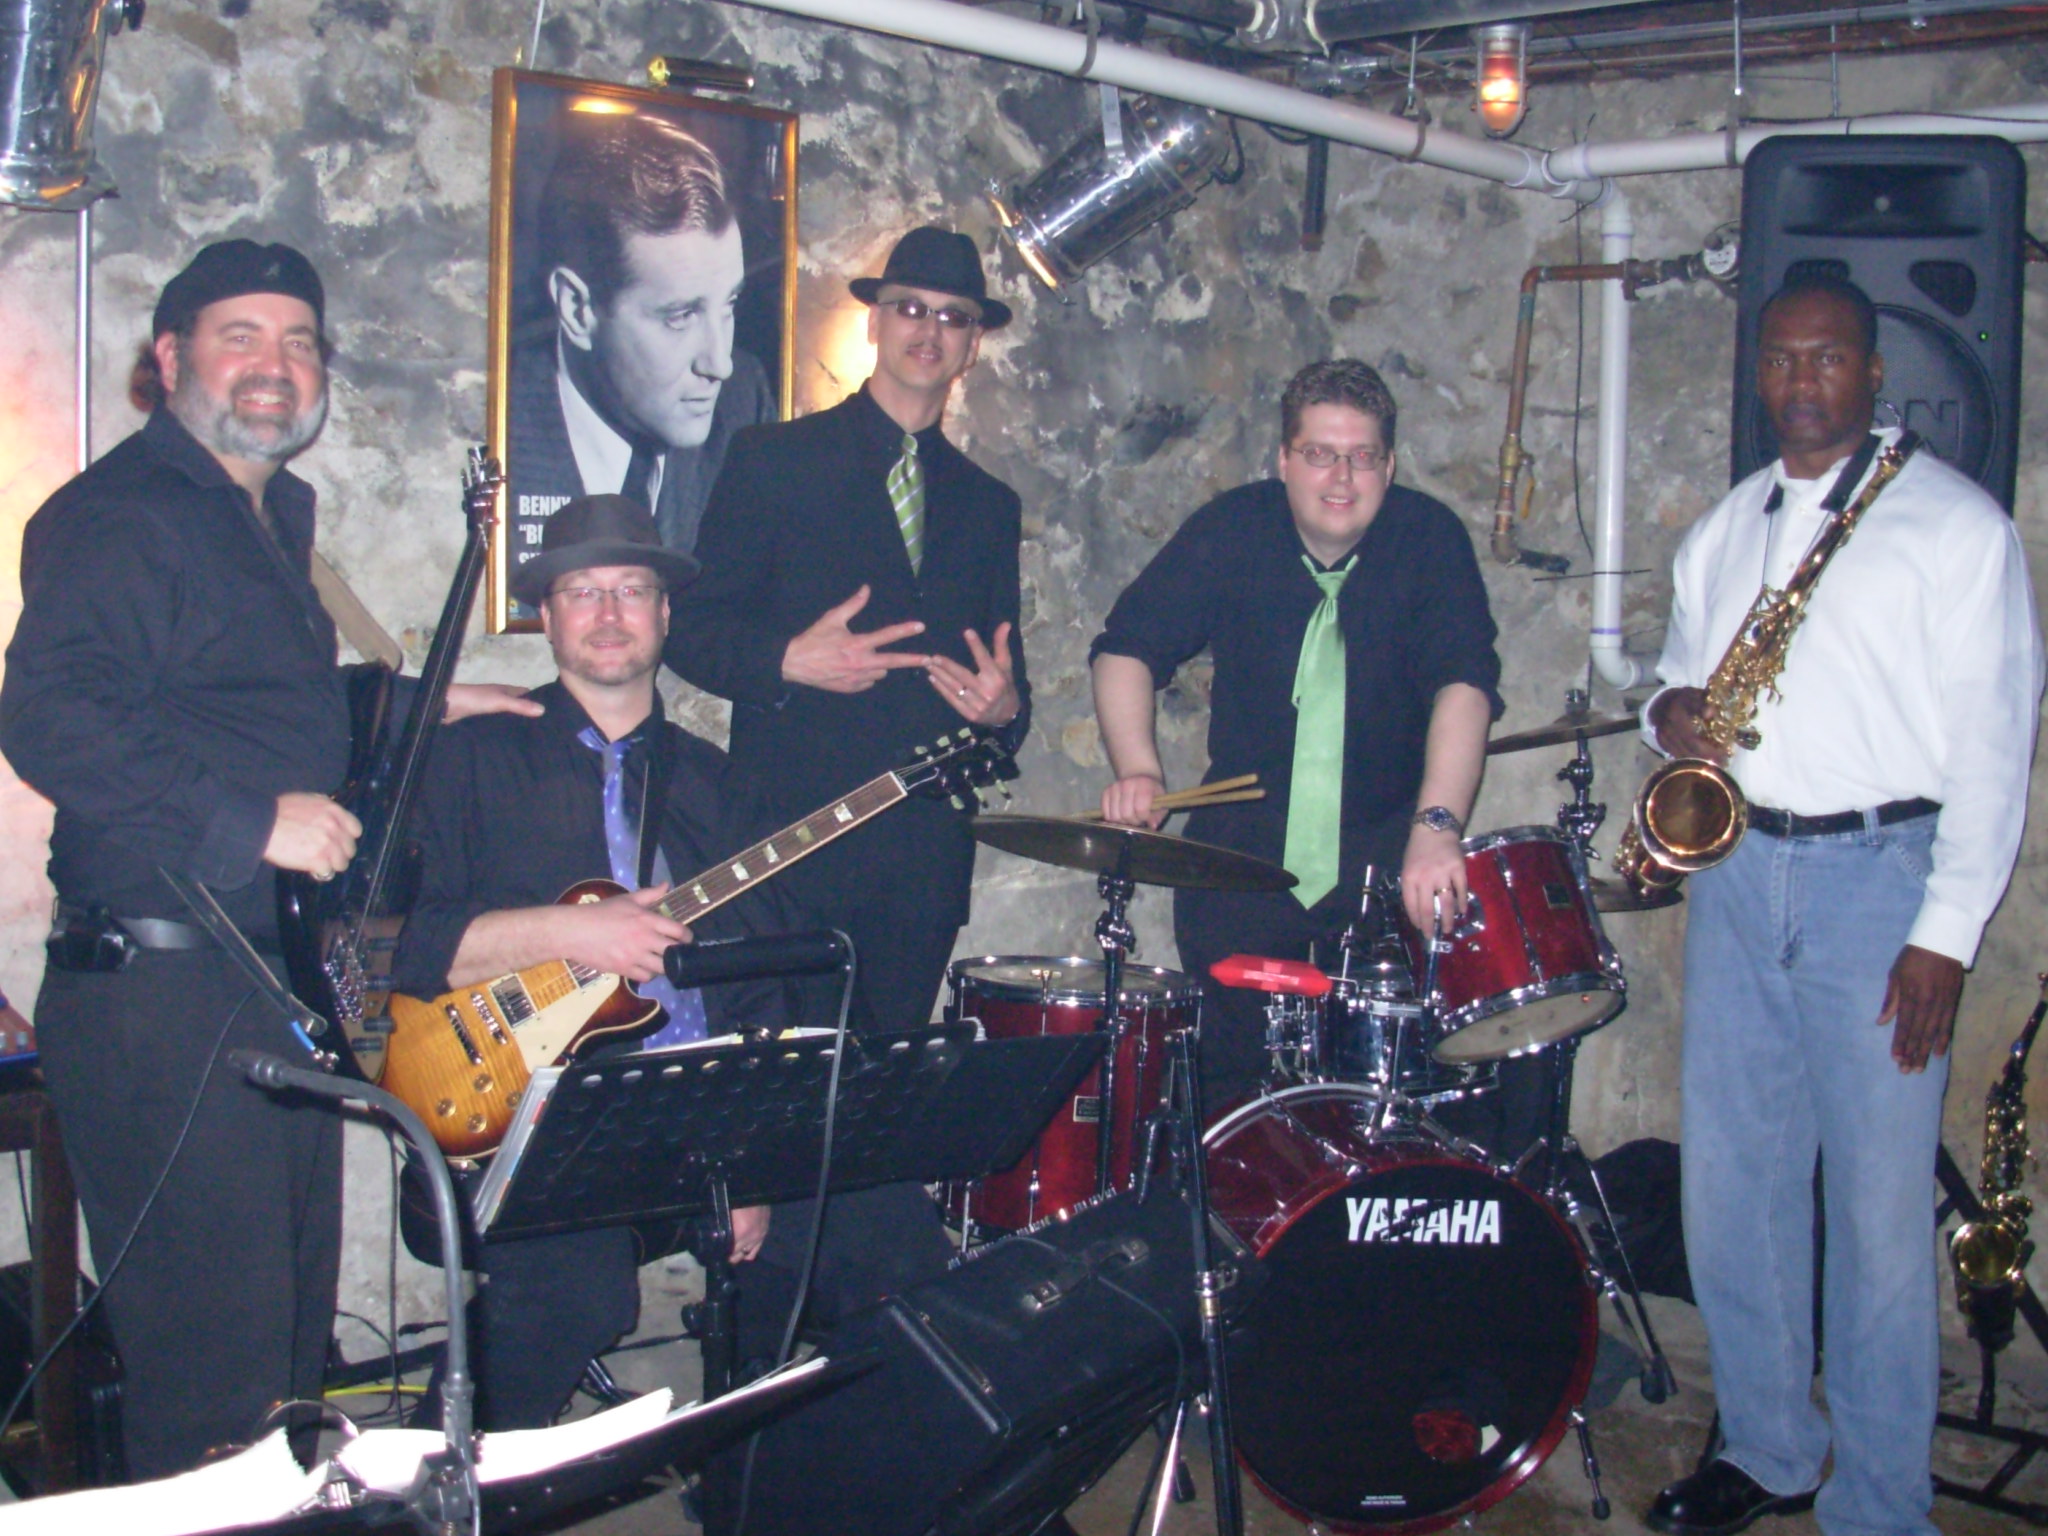 The complete Jazz Me  - Jazz & Blues Band
Kirk Wise  - bass, vocals
Doug Brenner - guitar
Mitch Graeff - lead vocal, harmonica
Josef Brye - drums
Tony Cannon - saxaphone
